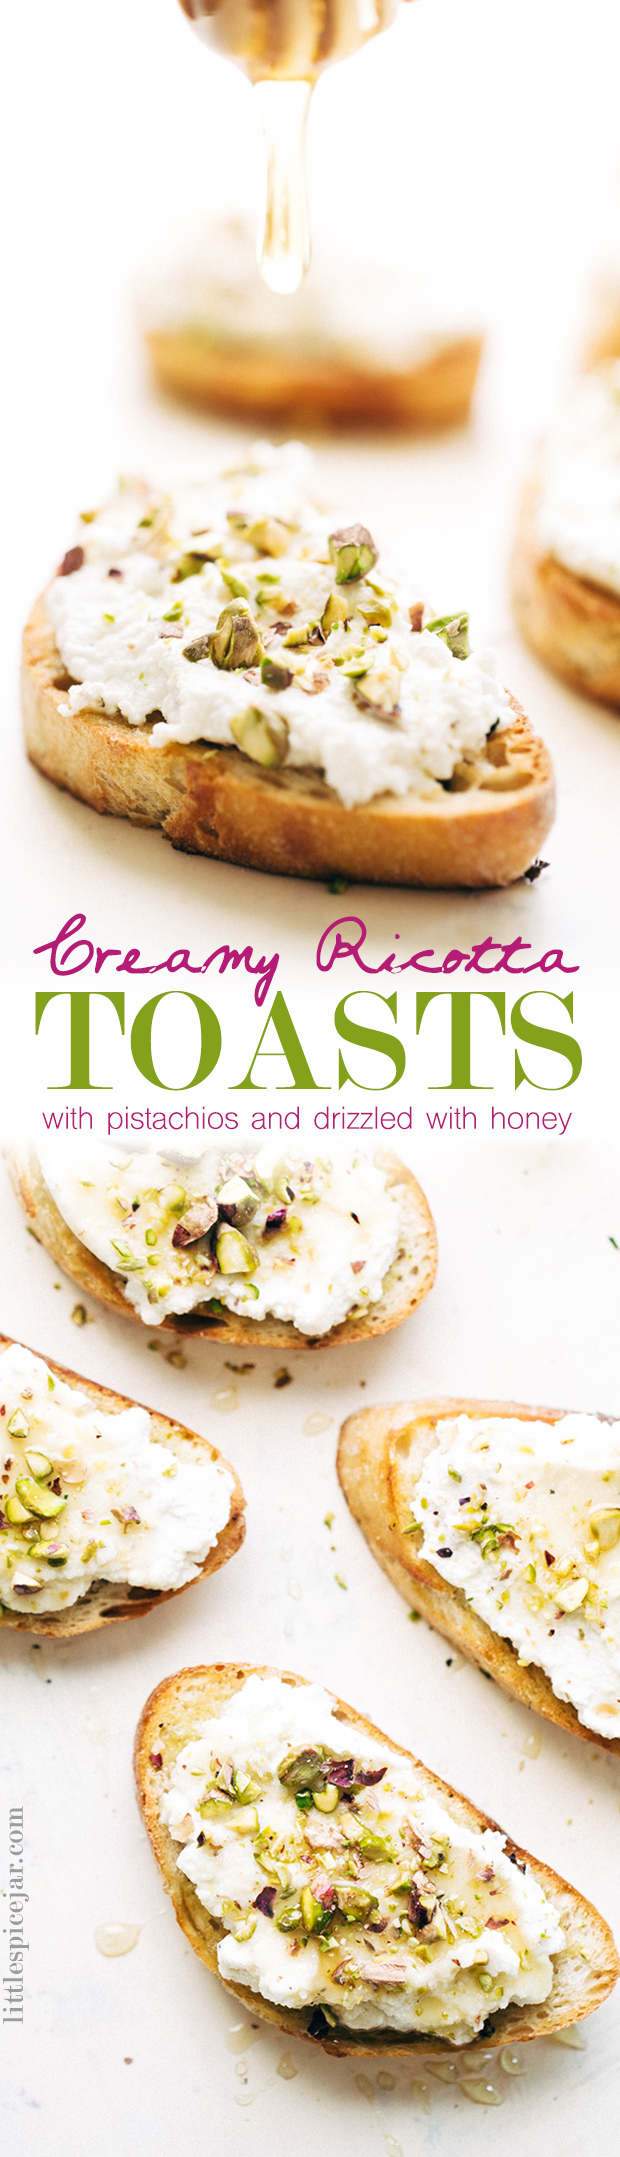 Ricotta Toasts with Pistachios and Honey - A quick and easy appetizer. The bread is warm, the ricotta is creamy, with a kiss of chopped pistachios and a drizzle of honey! #appetizers #toasts #ricottatoasts #aldigram #sponsored | Littlespicejar.com